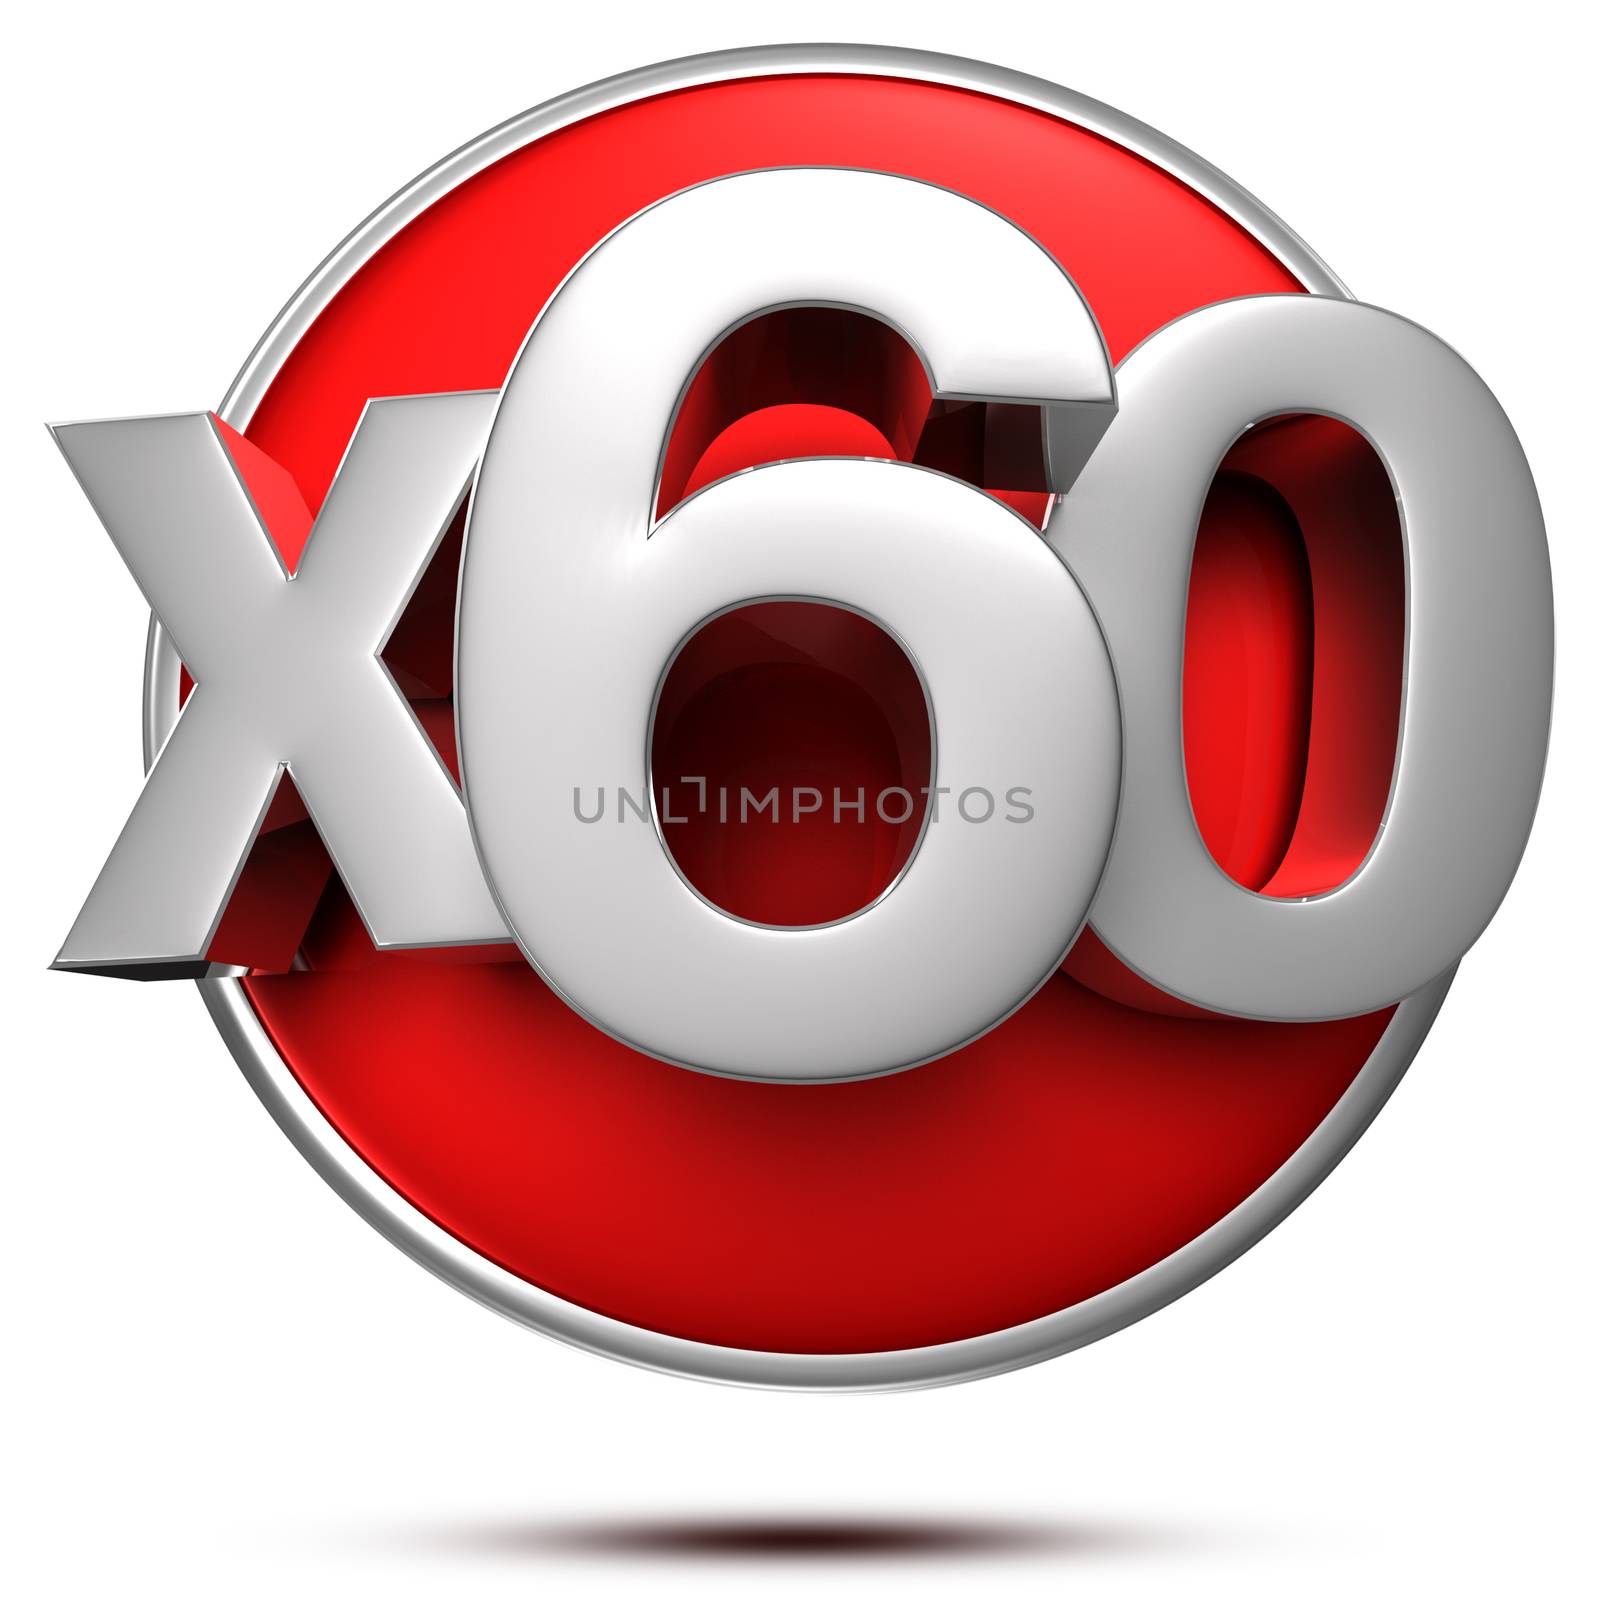 x50 3d rendering on white background.(with Clipping Path).